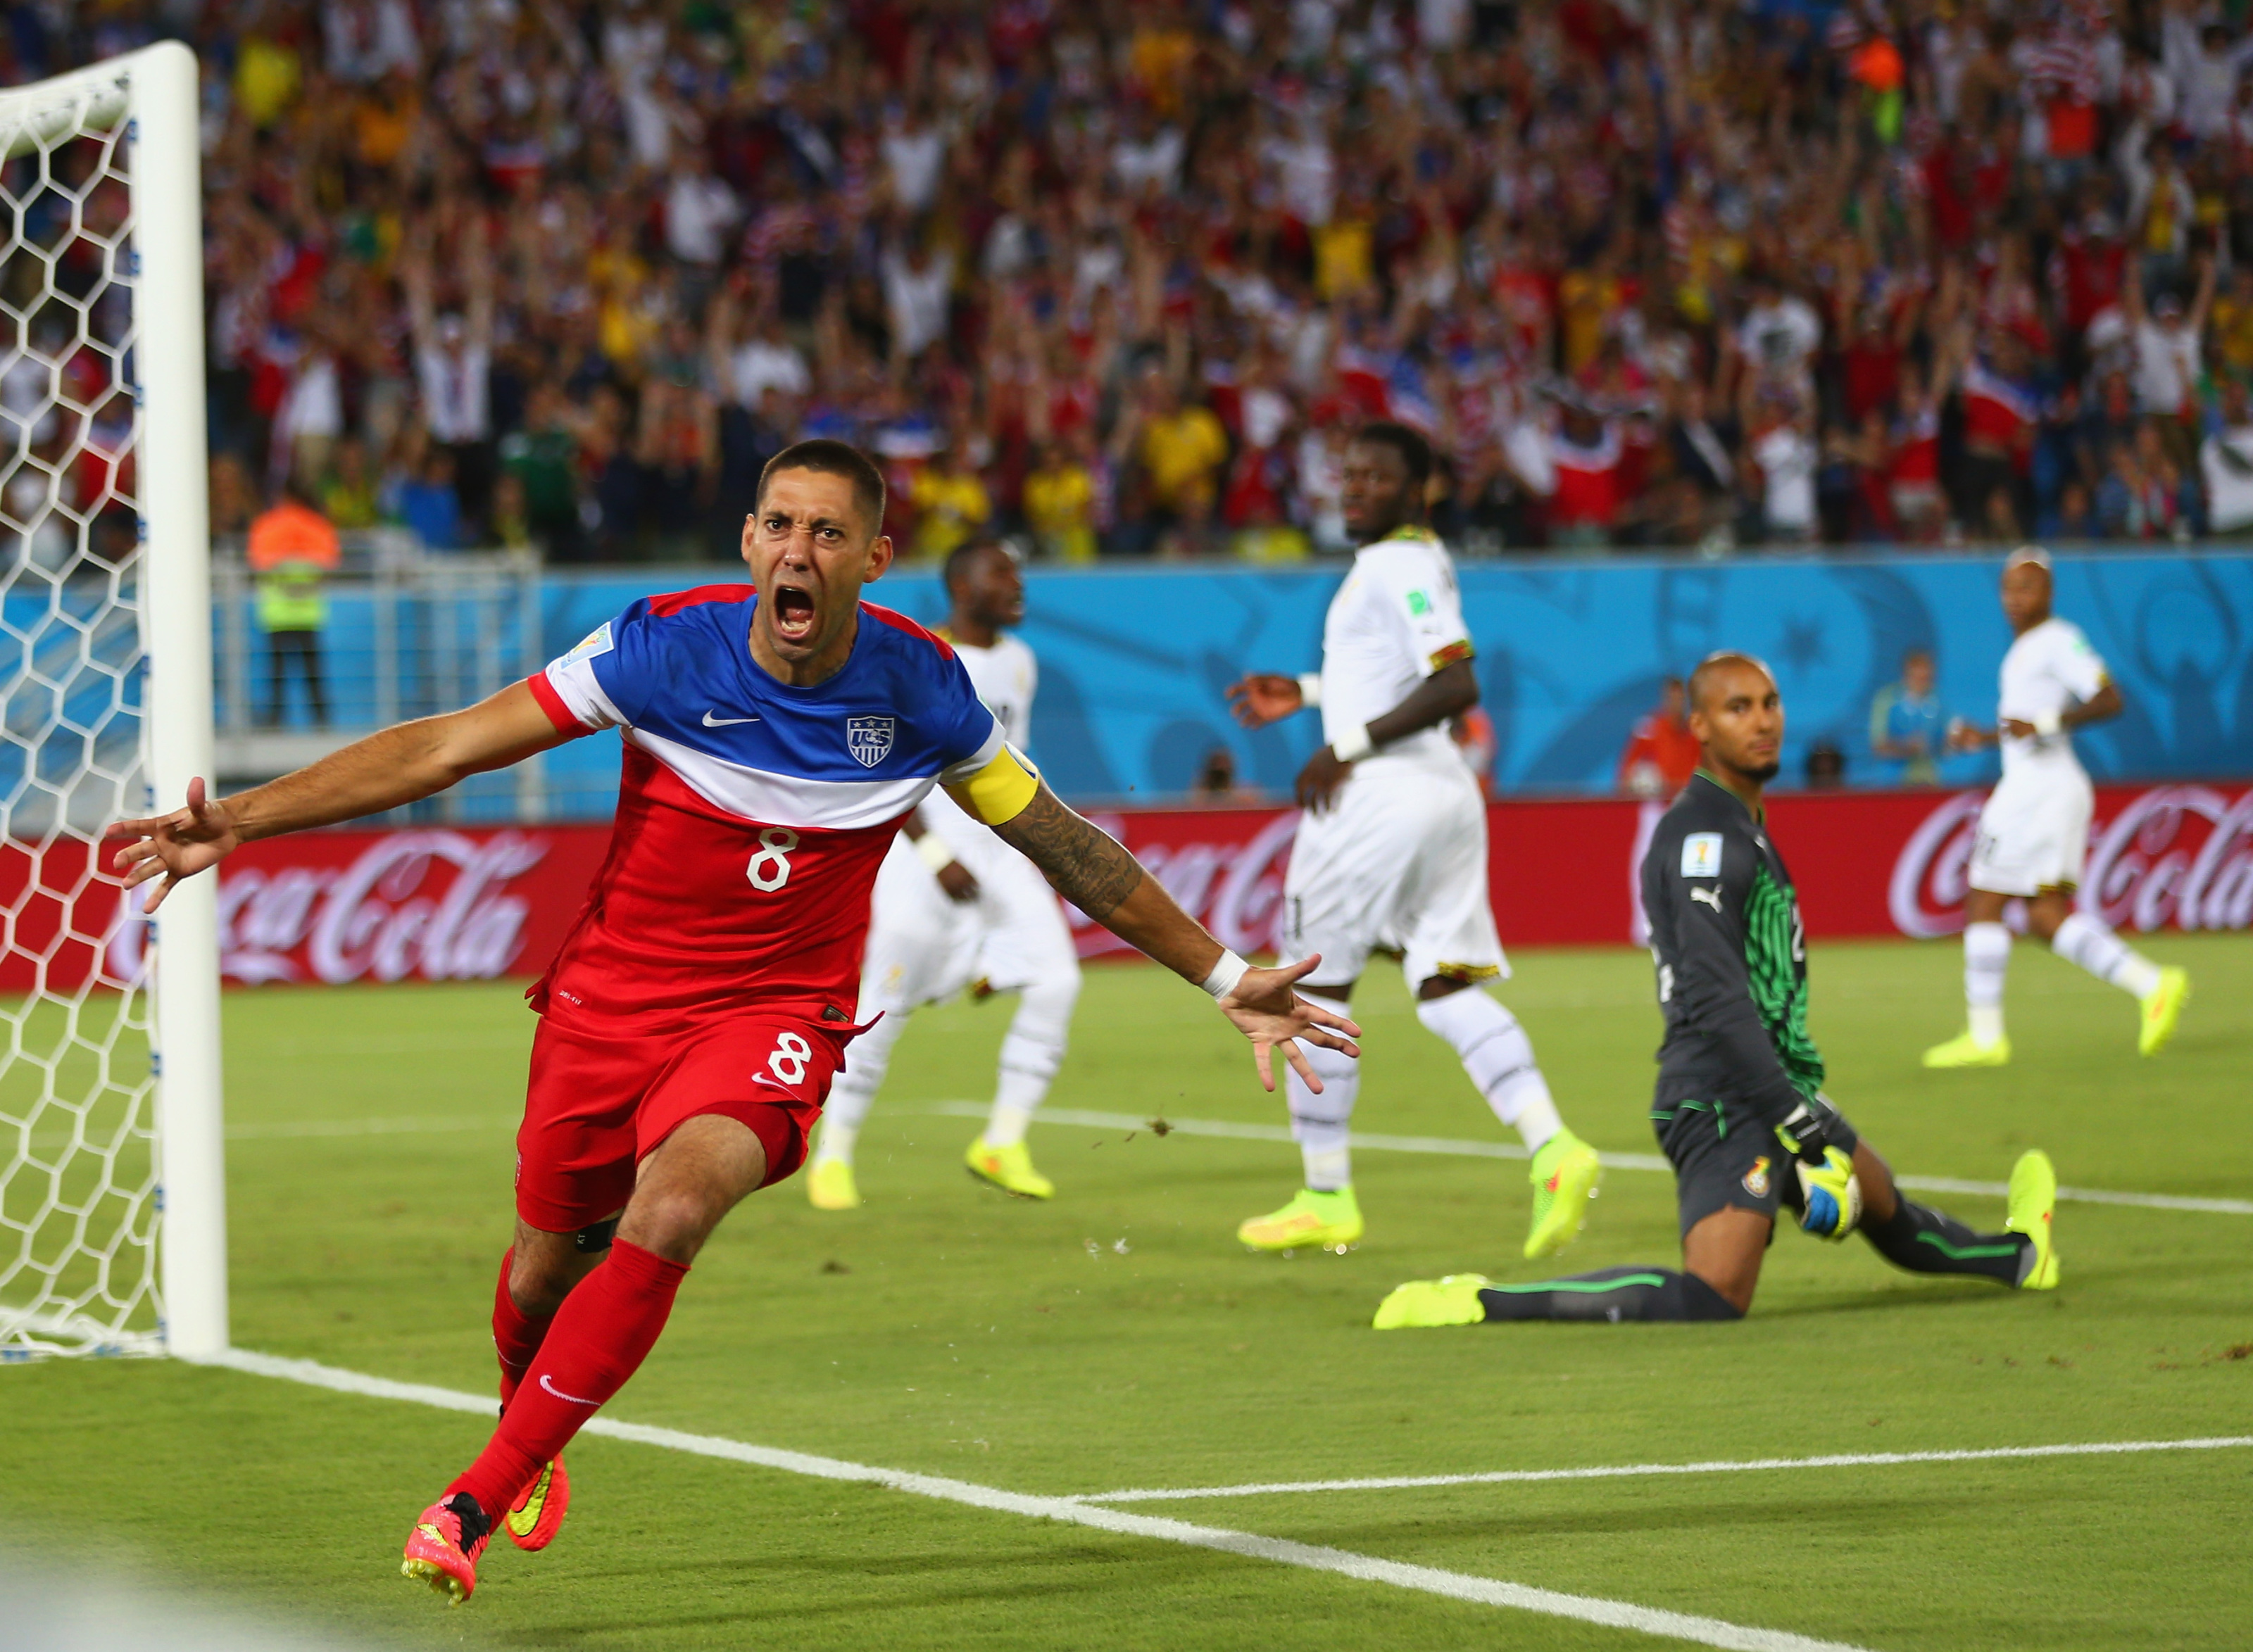 Clint Dempsey made a tough request to the USMNT